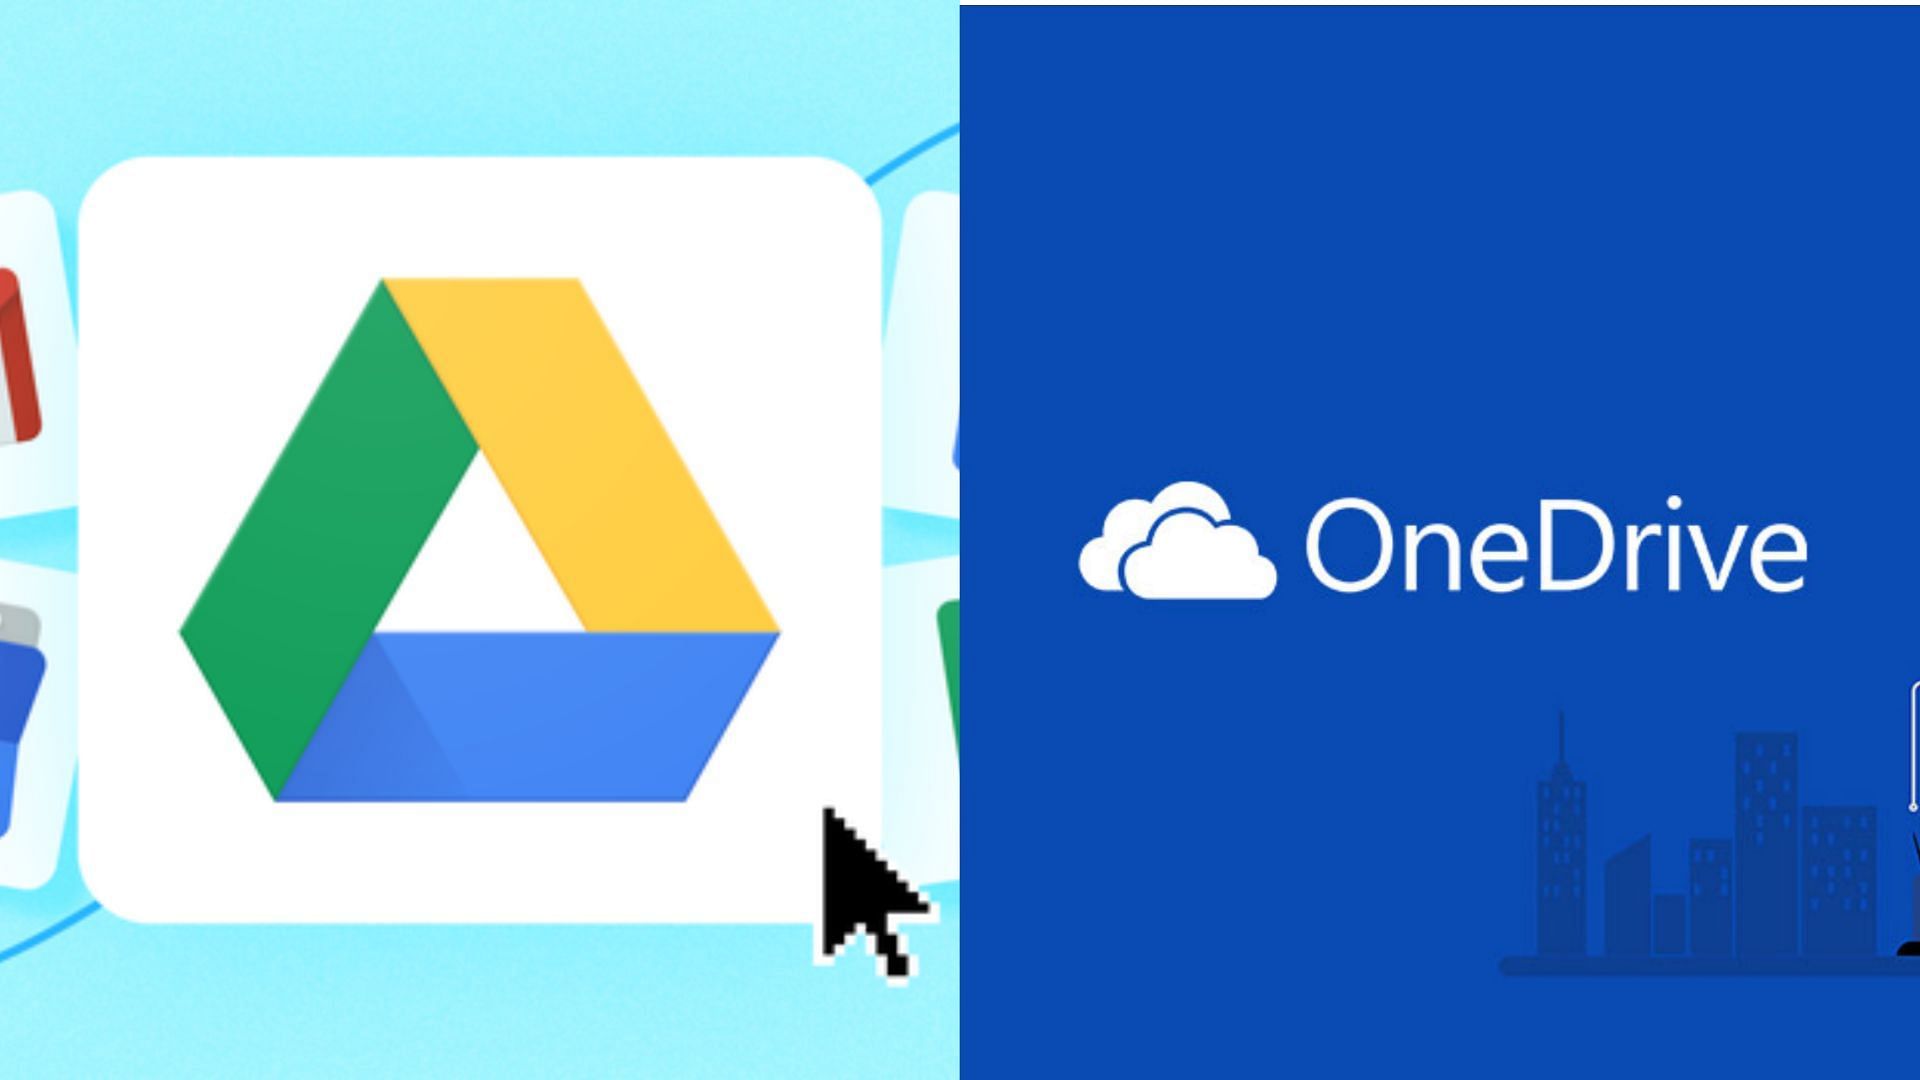 Both Google and Microsoft have interesting offers in the space for cloud storage (Images via Google, Microsoft)